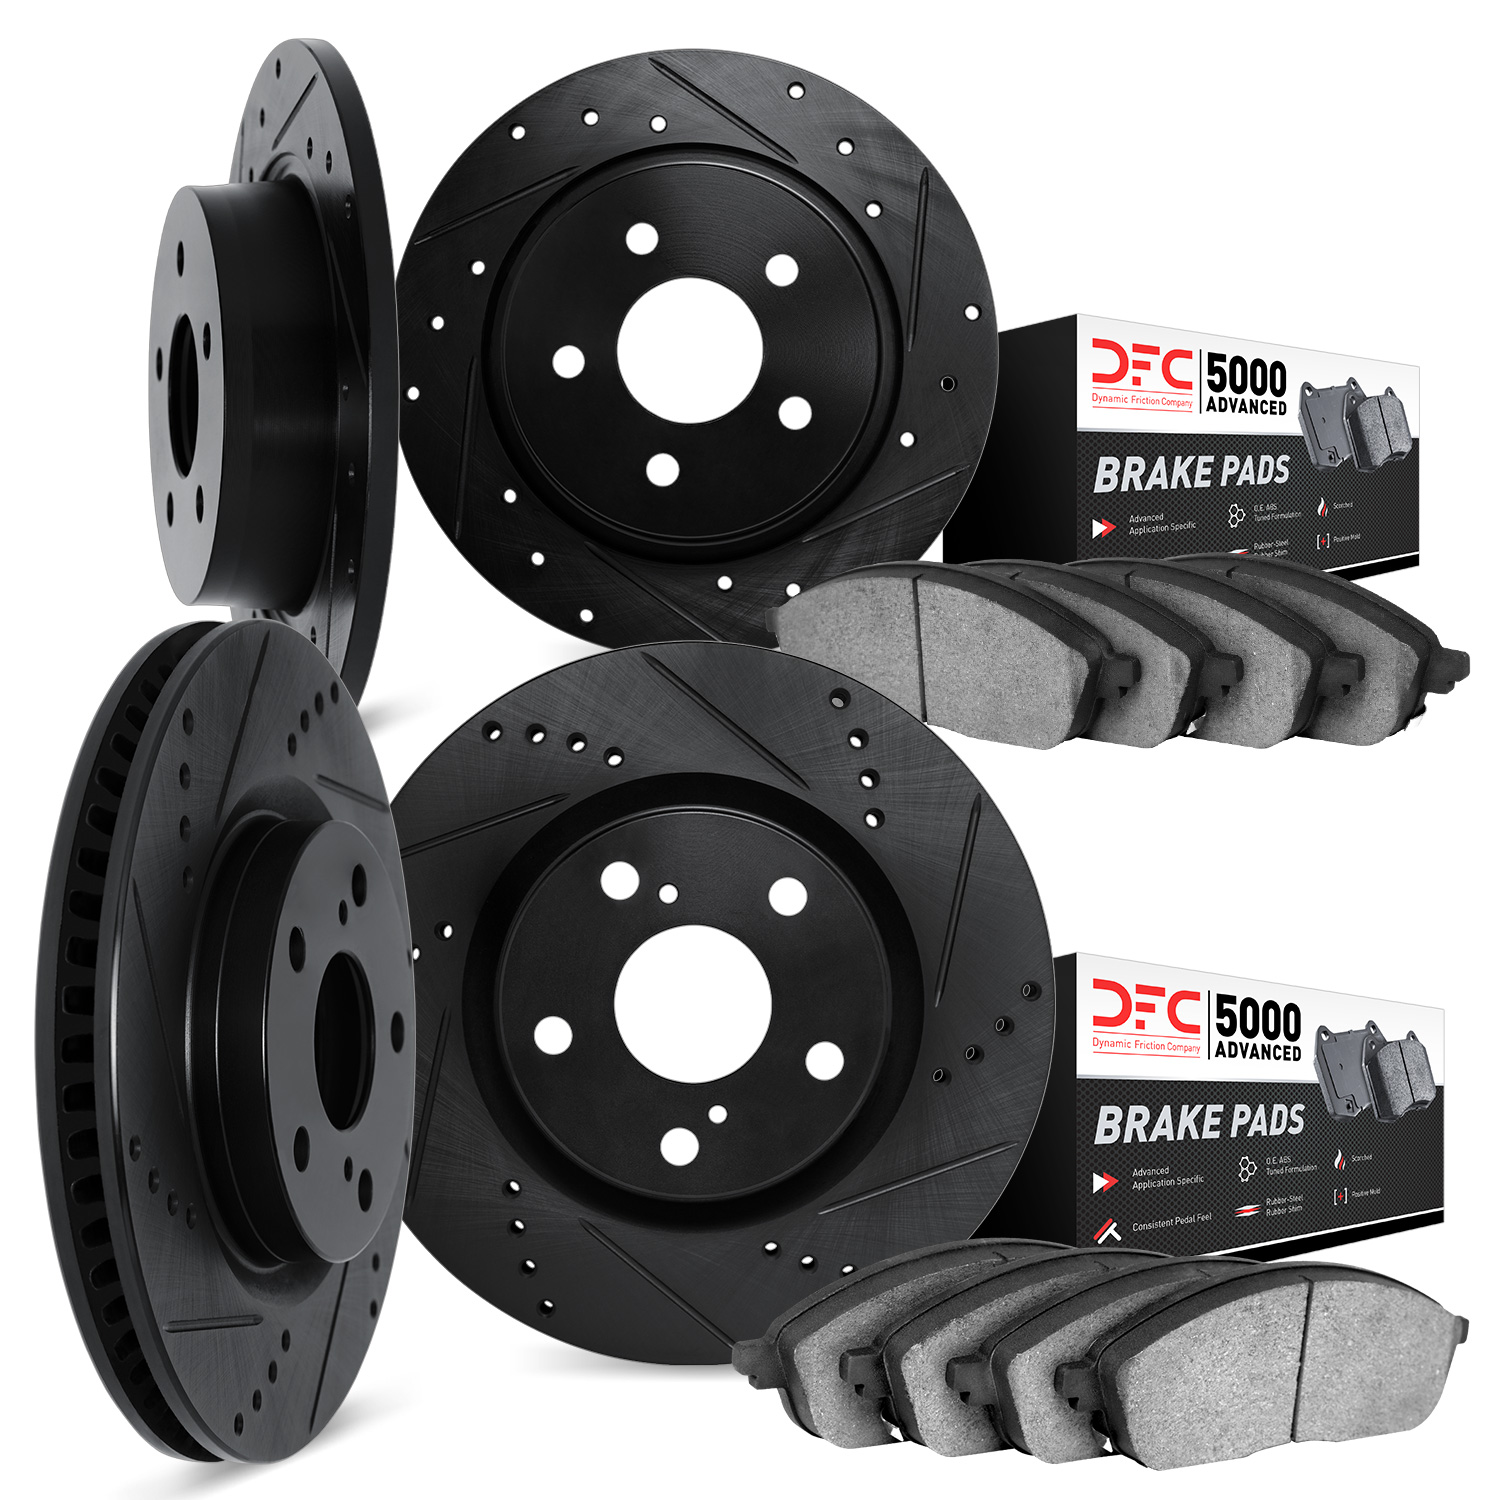 8504-76131 Drilled/Slotted Brake Rotors w/5000 Advanced Brake Pads Kit [Black], 1992-1996 Lexus/Toyota/Scion, Position: Front an